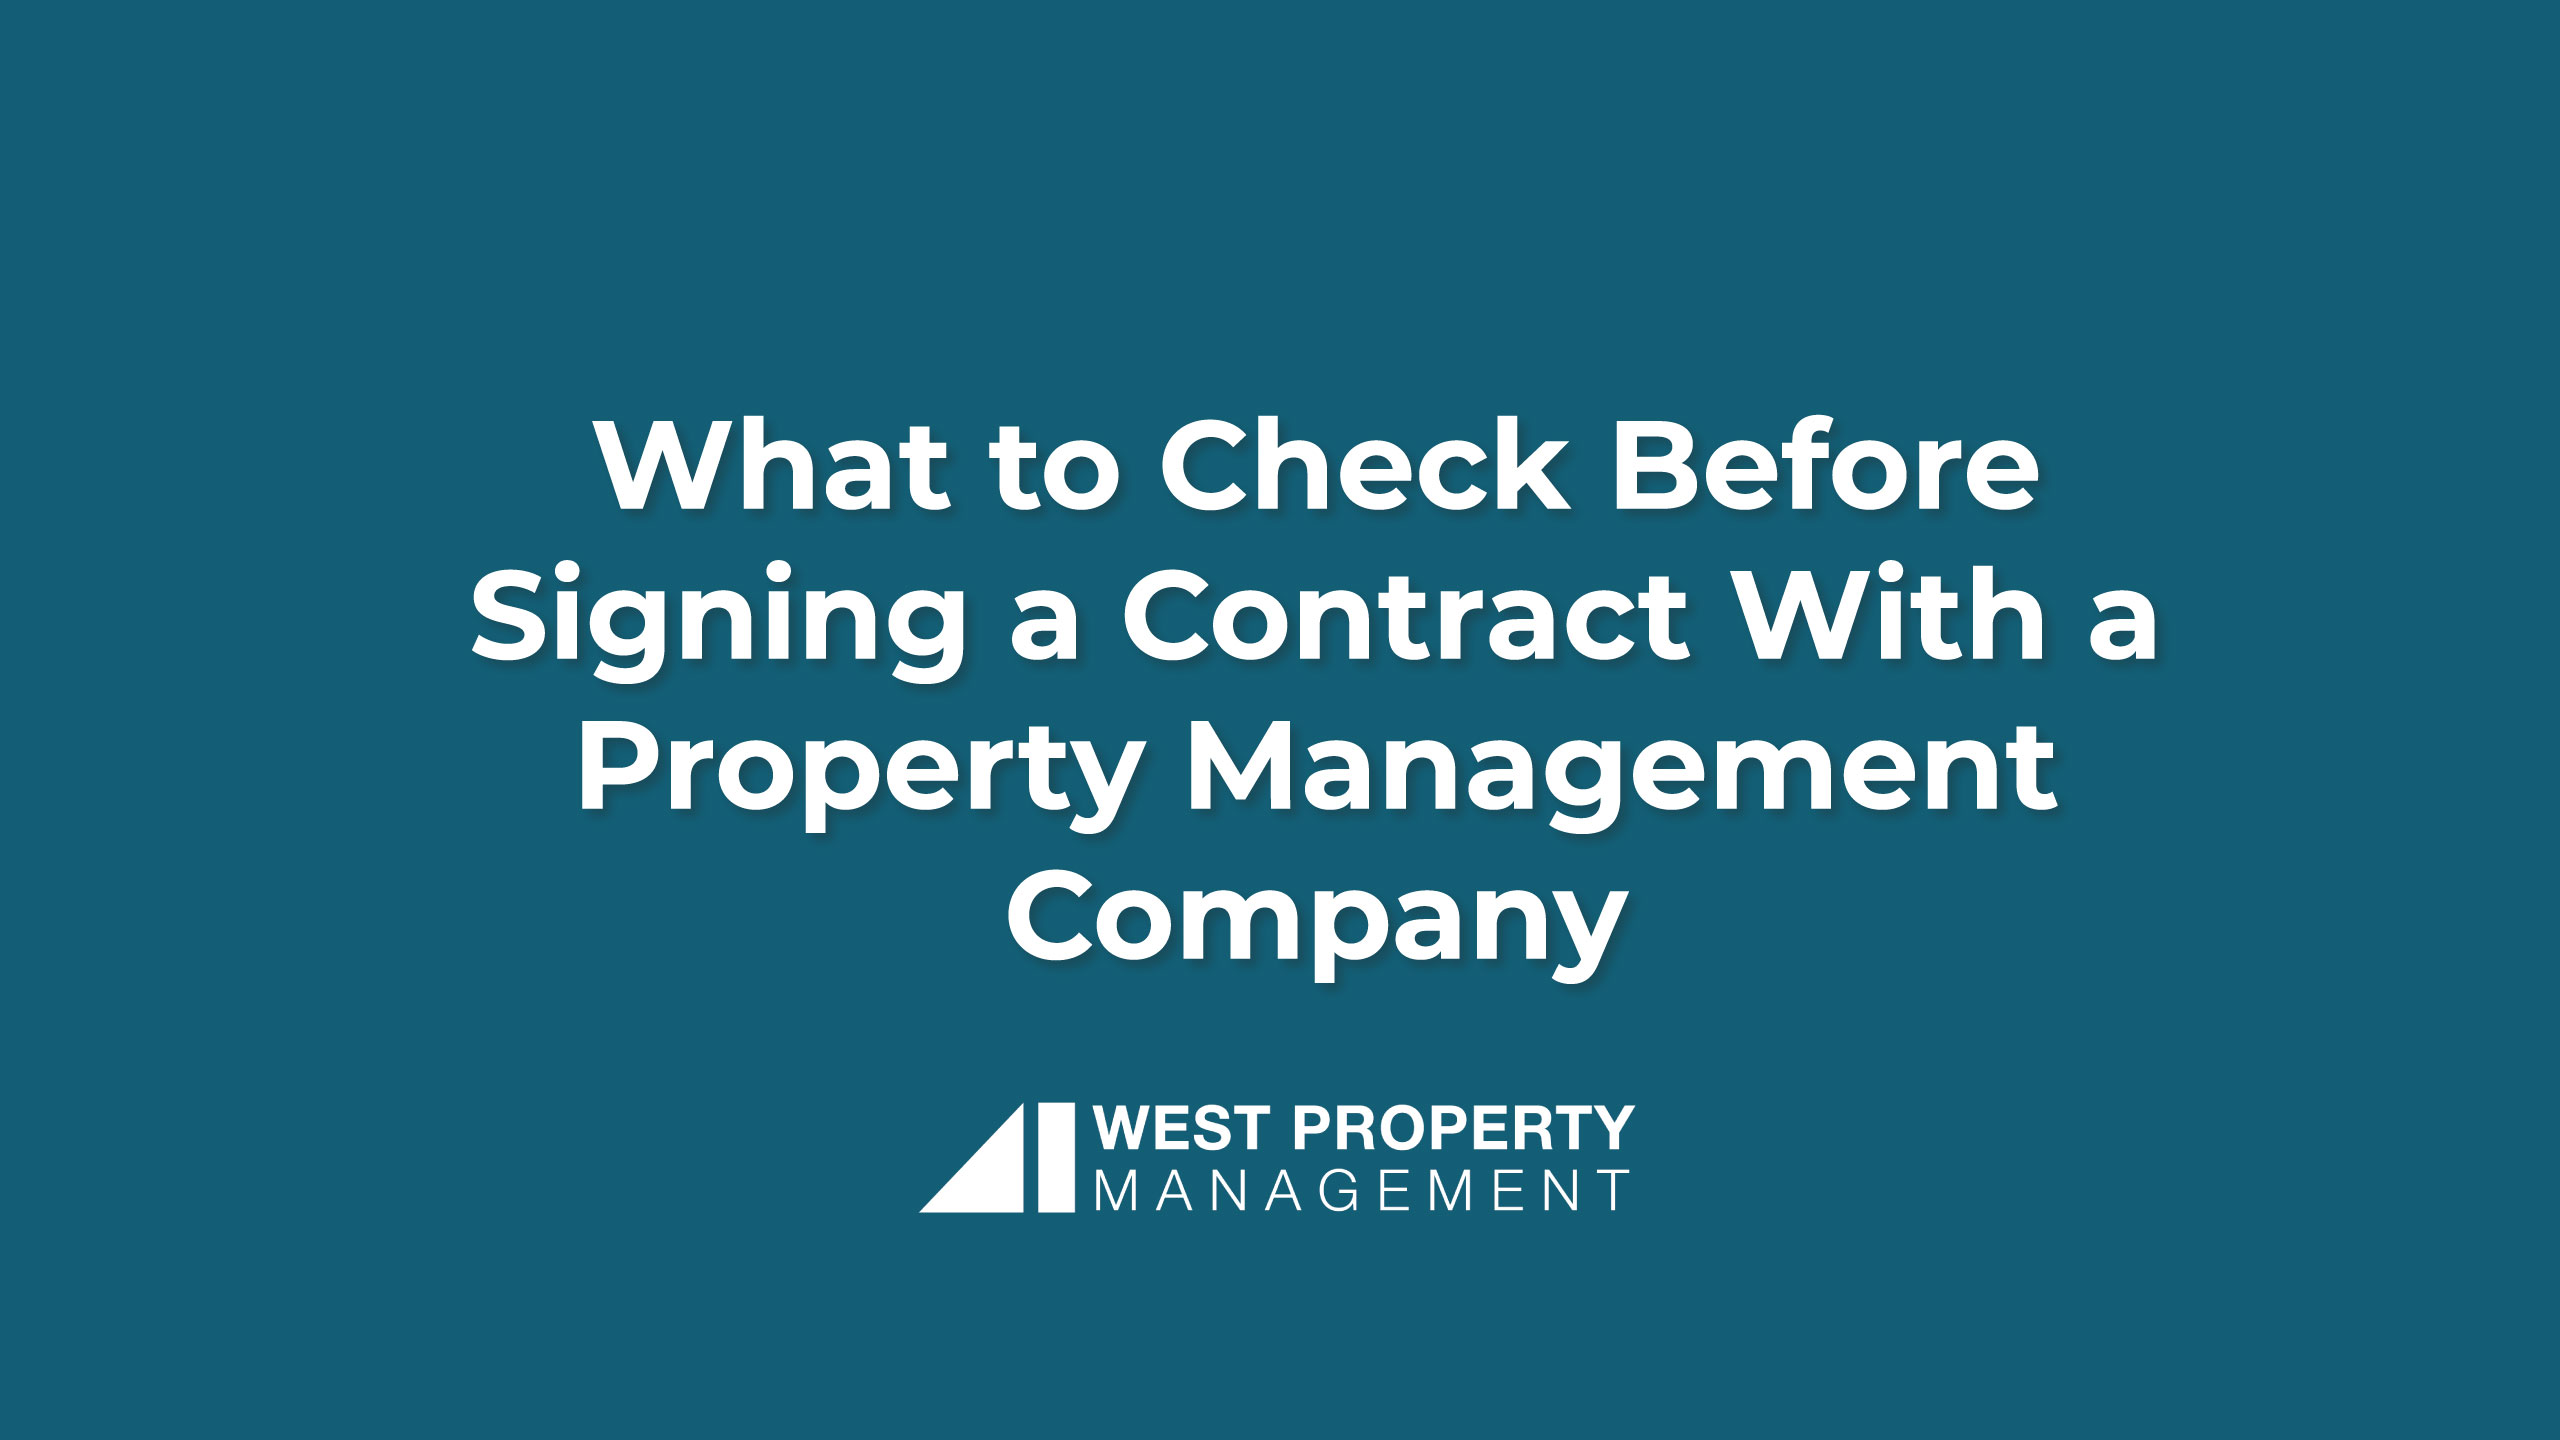 What to Check Before Signing a Contract With a Property Management Company